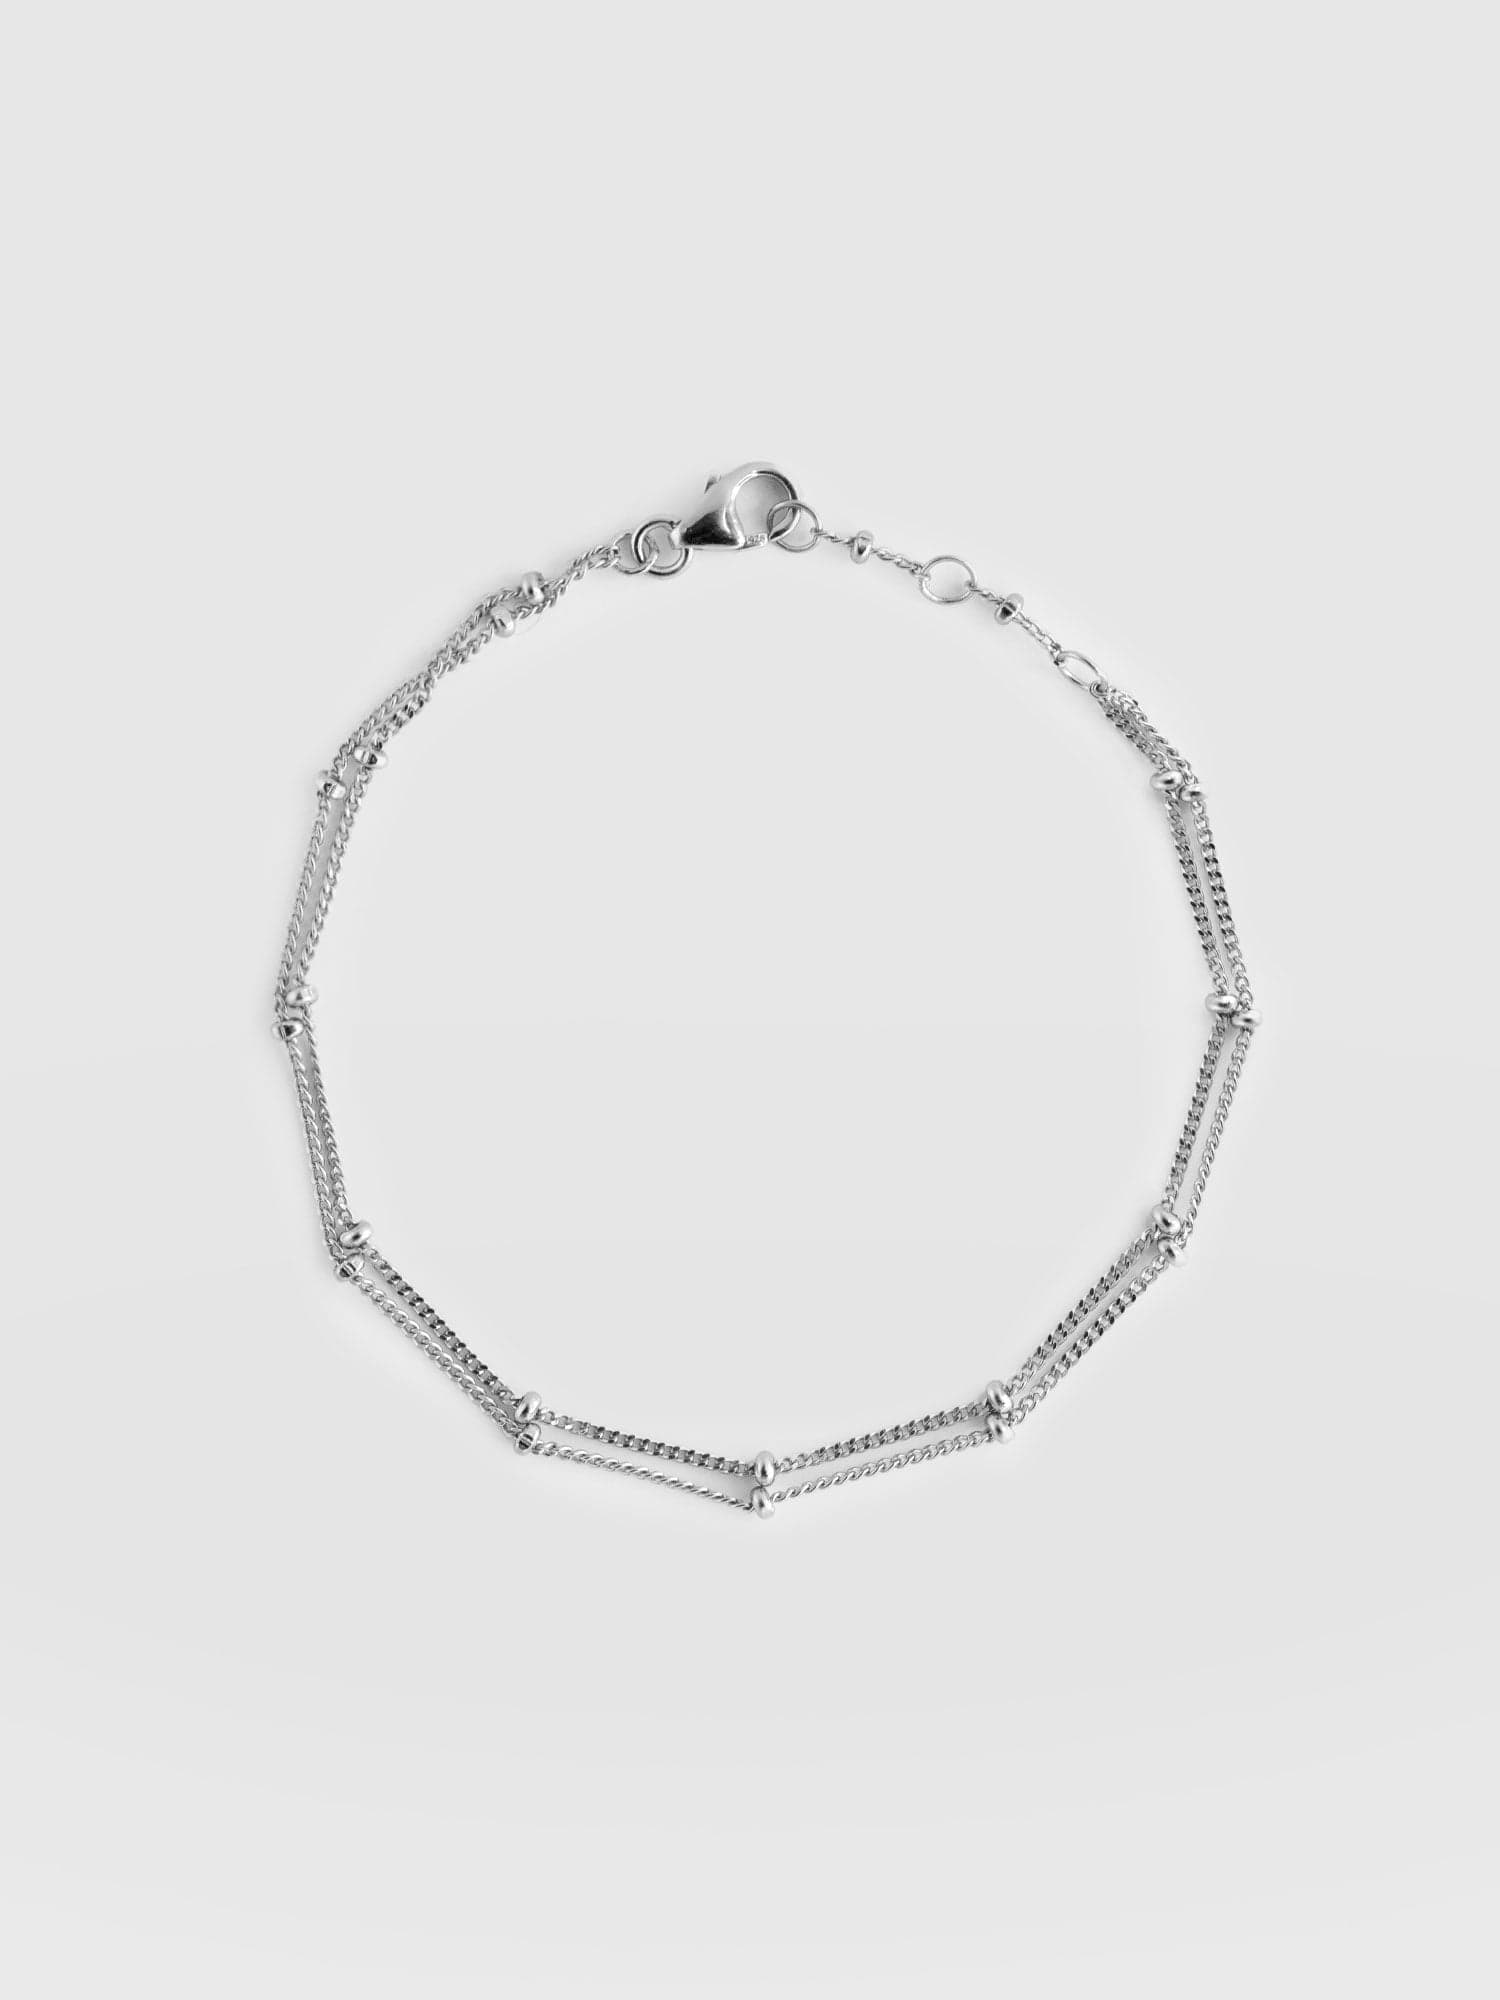 Silver Chain Bracelet, Weight :15 Gm at Rs 700/piece in Kolkata | ID:  21891566312